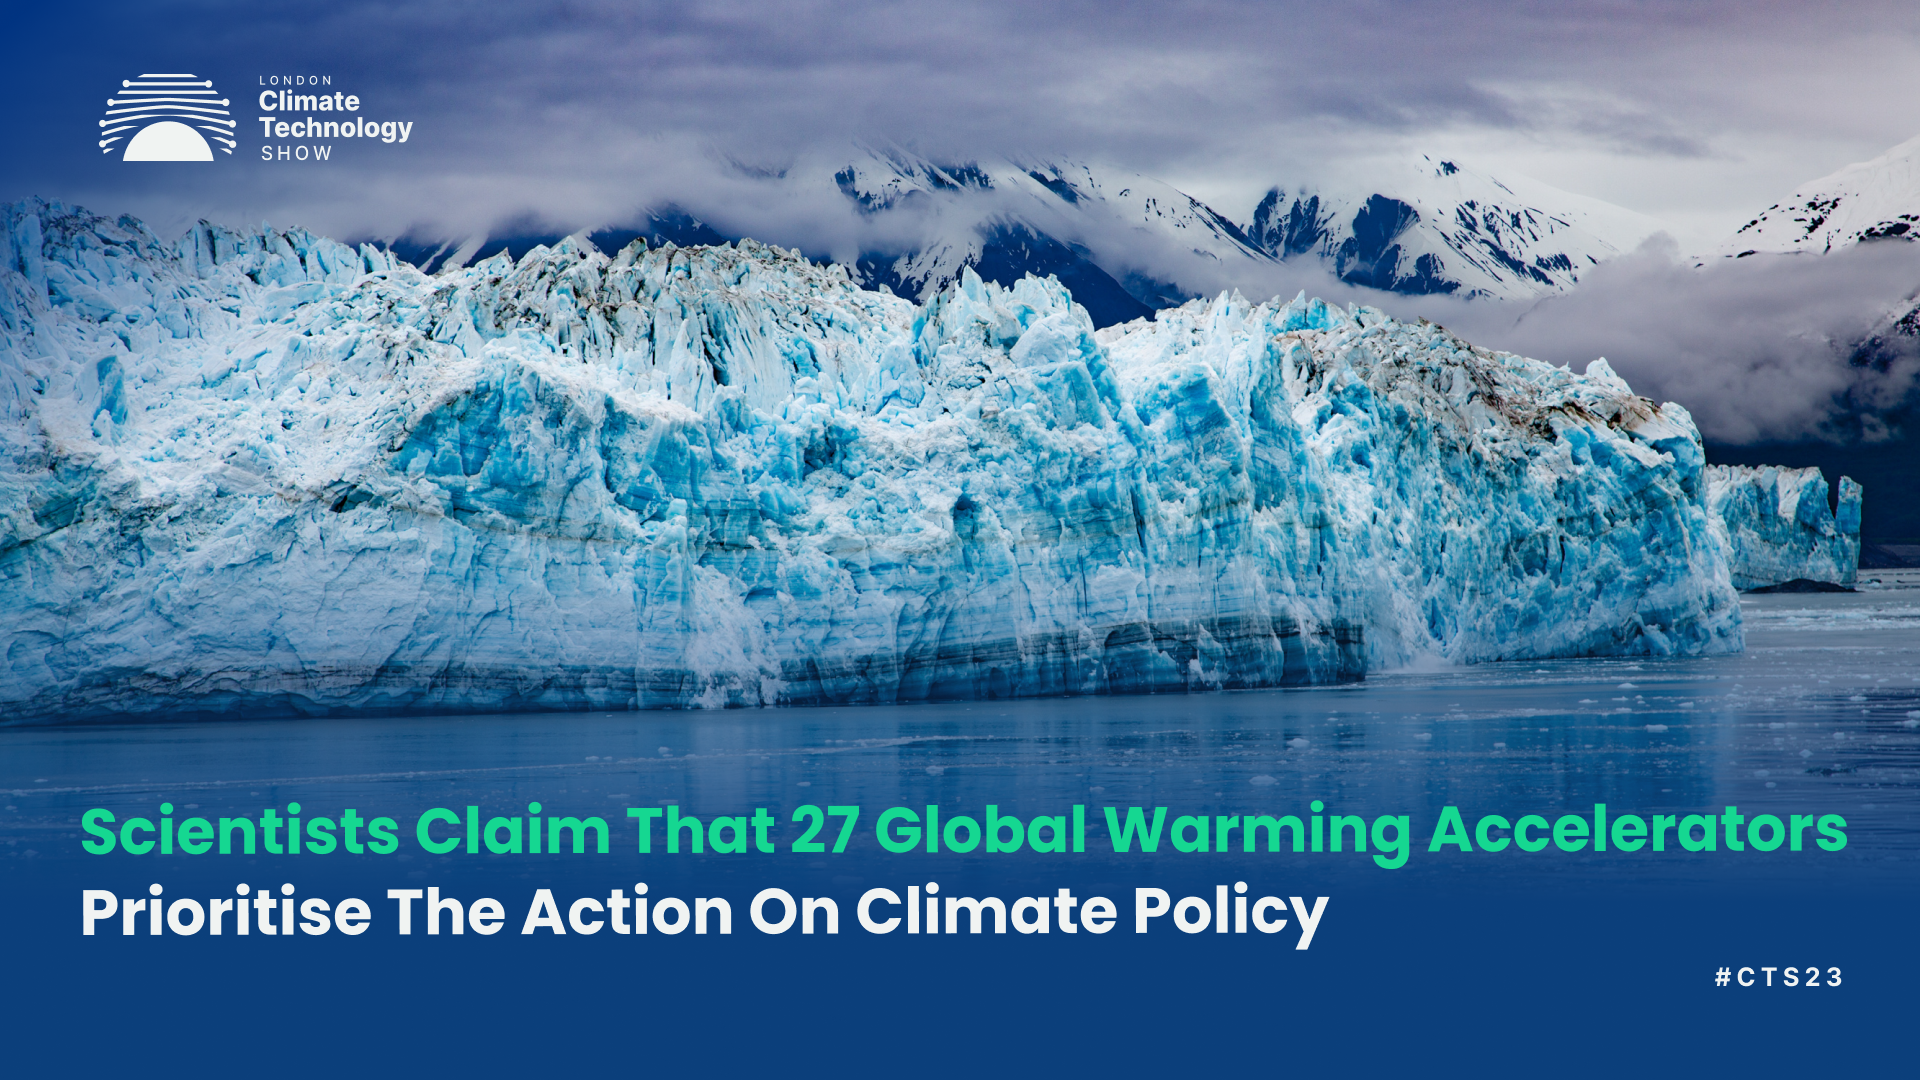 Scientists Claim That 27 Global Warming Accelerators Prioritise The Action On Climate Policy